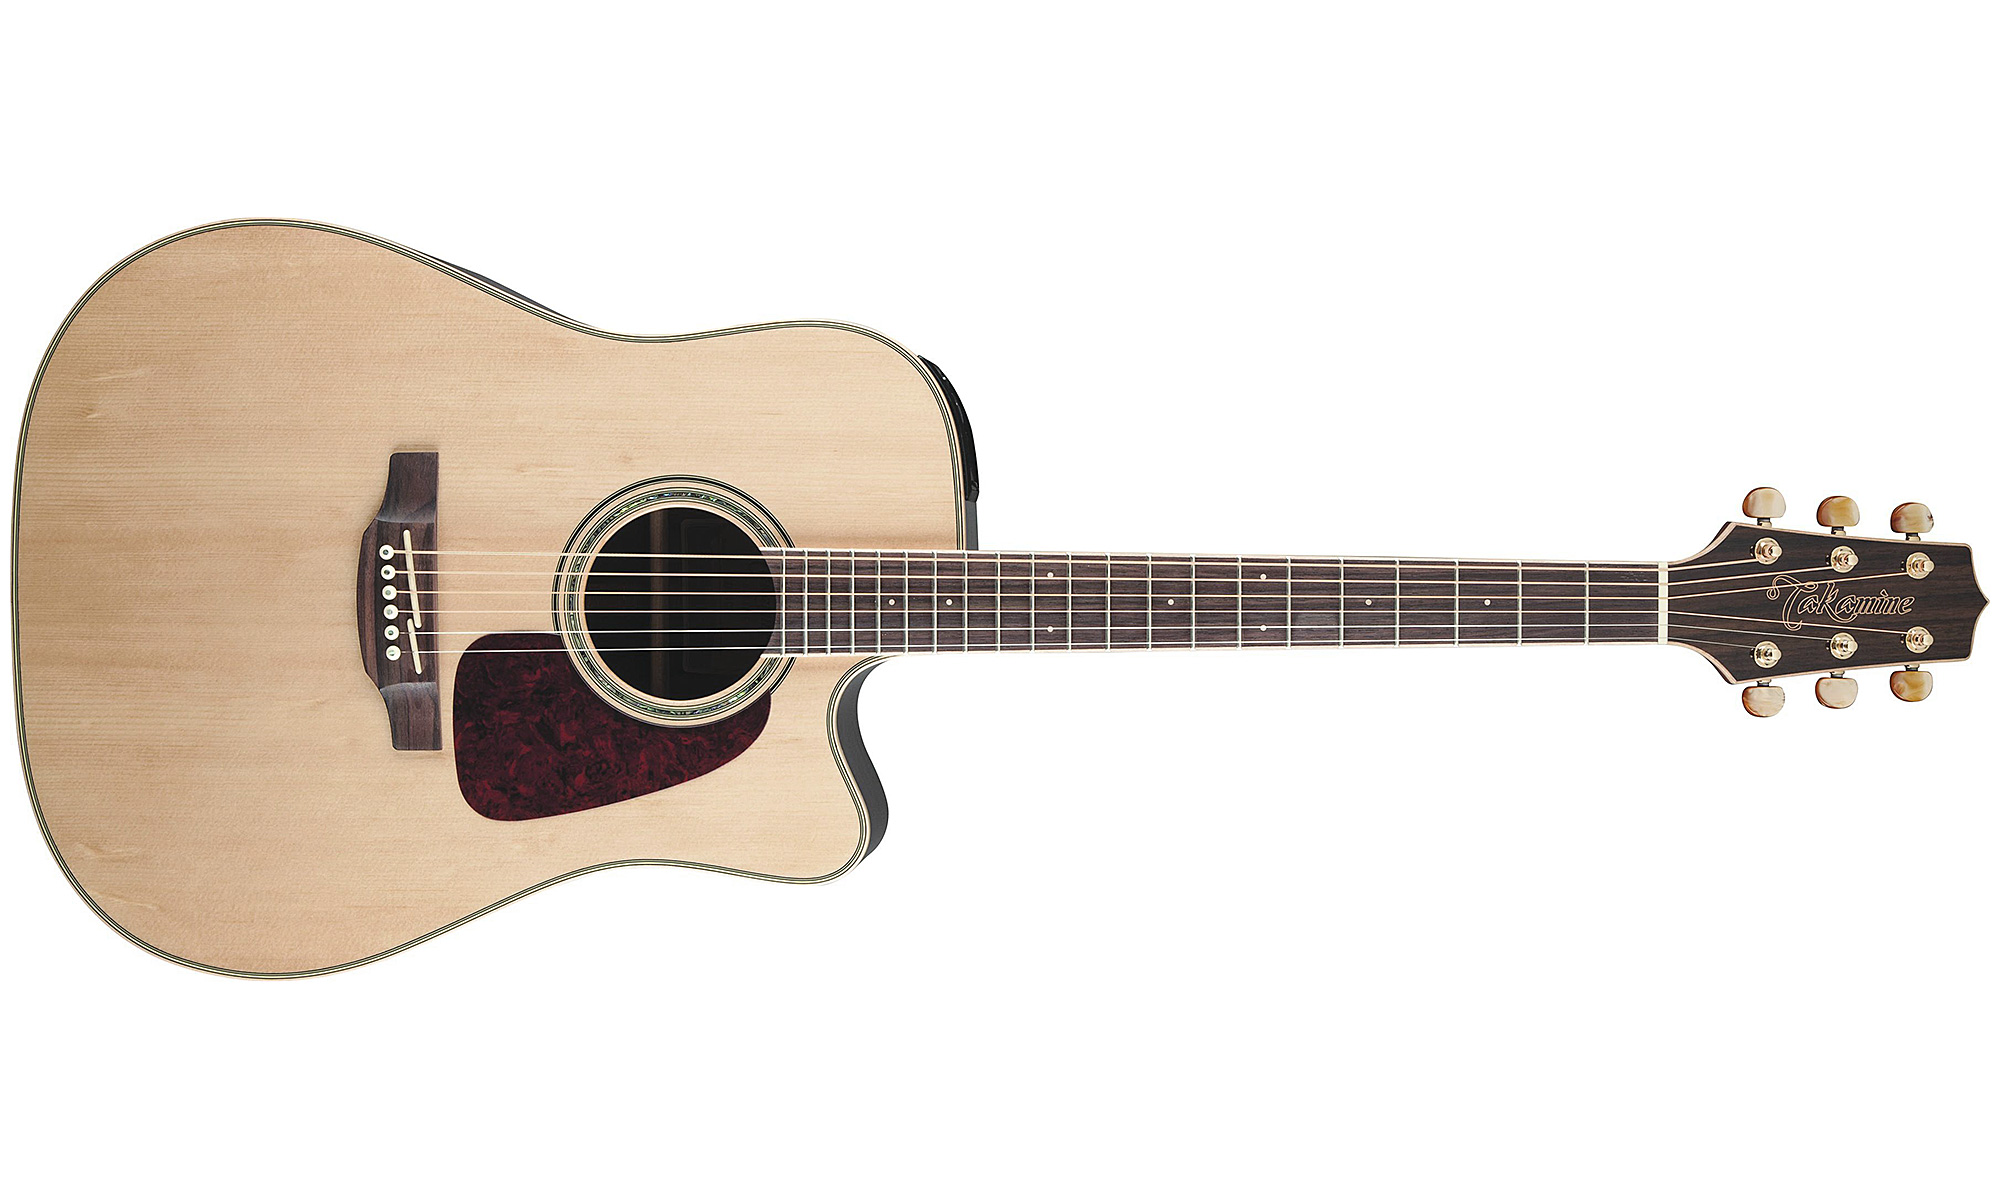 Takamine Gd71ce-nat Dreadnought Cw Epicea Palissandre - Natural Gloss - Electro acoustic guitar - Variation 4